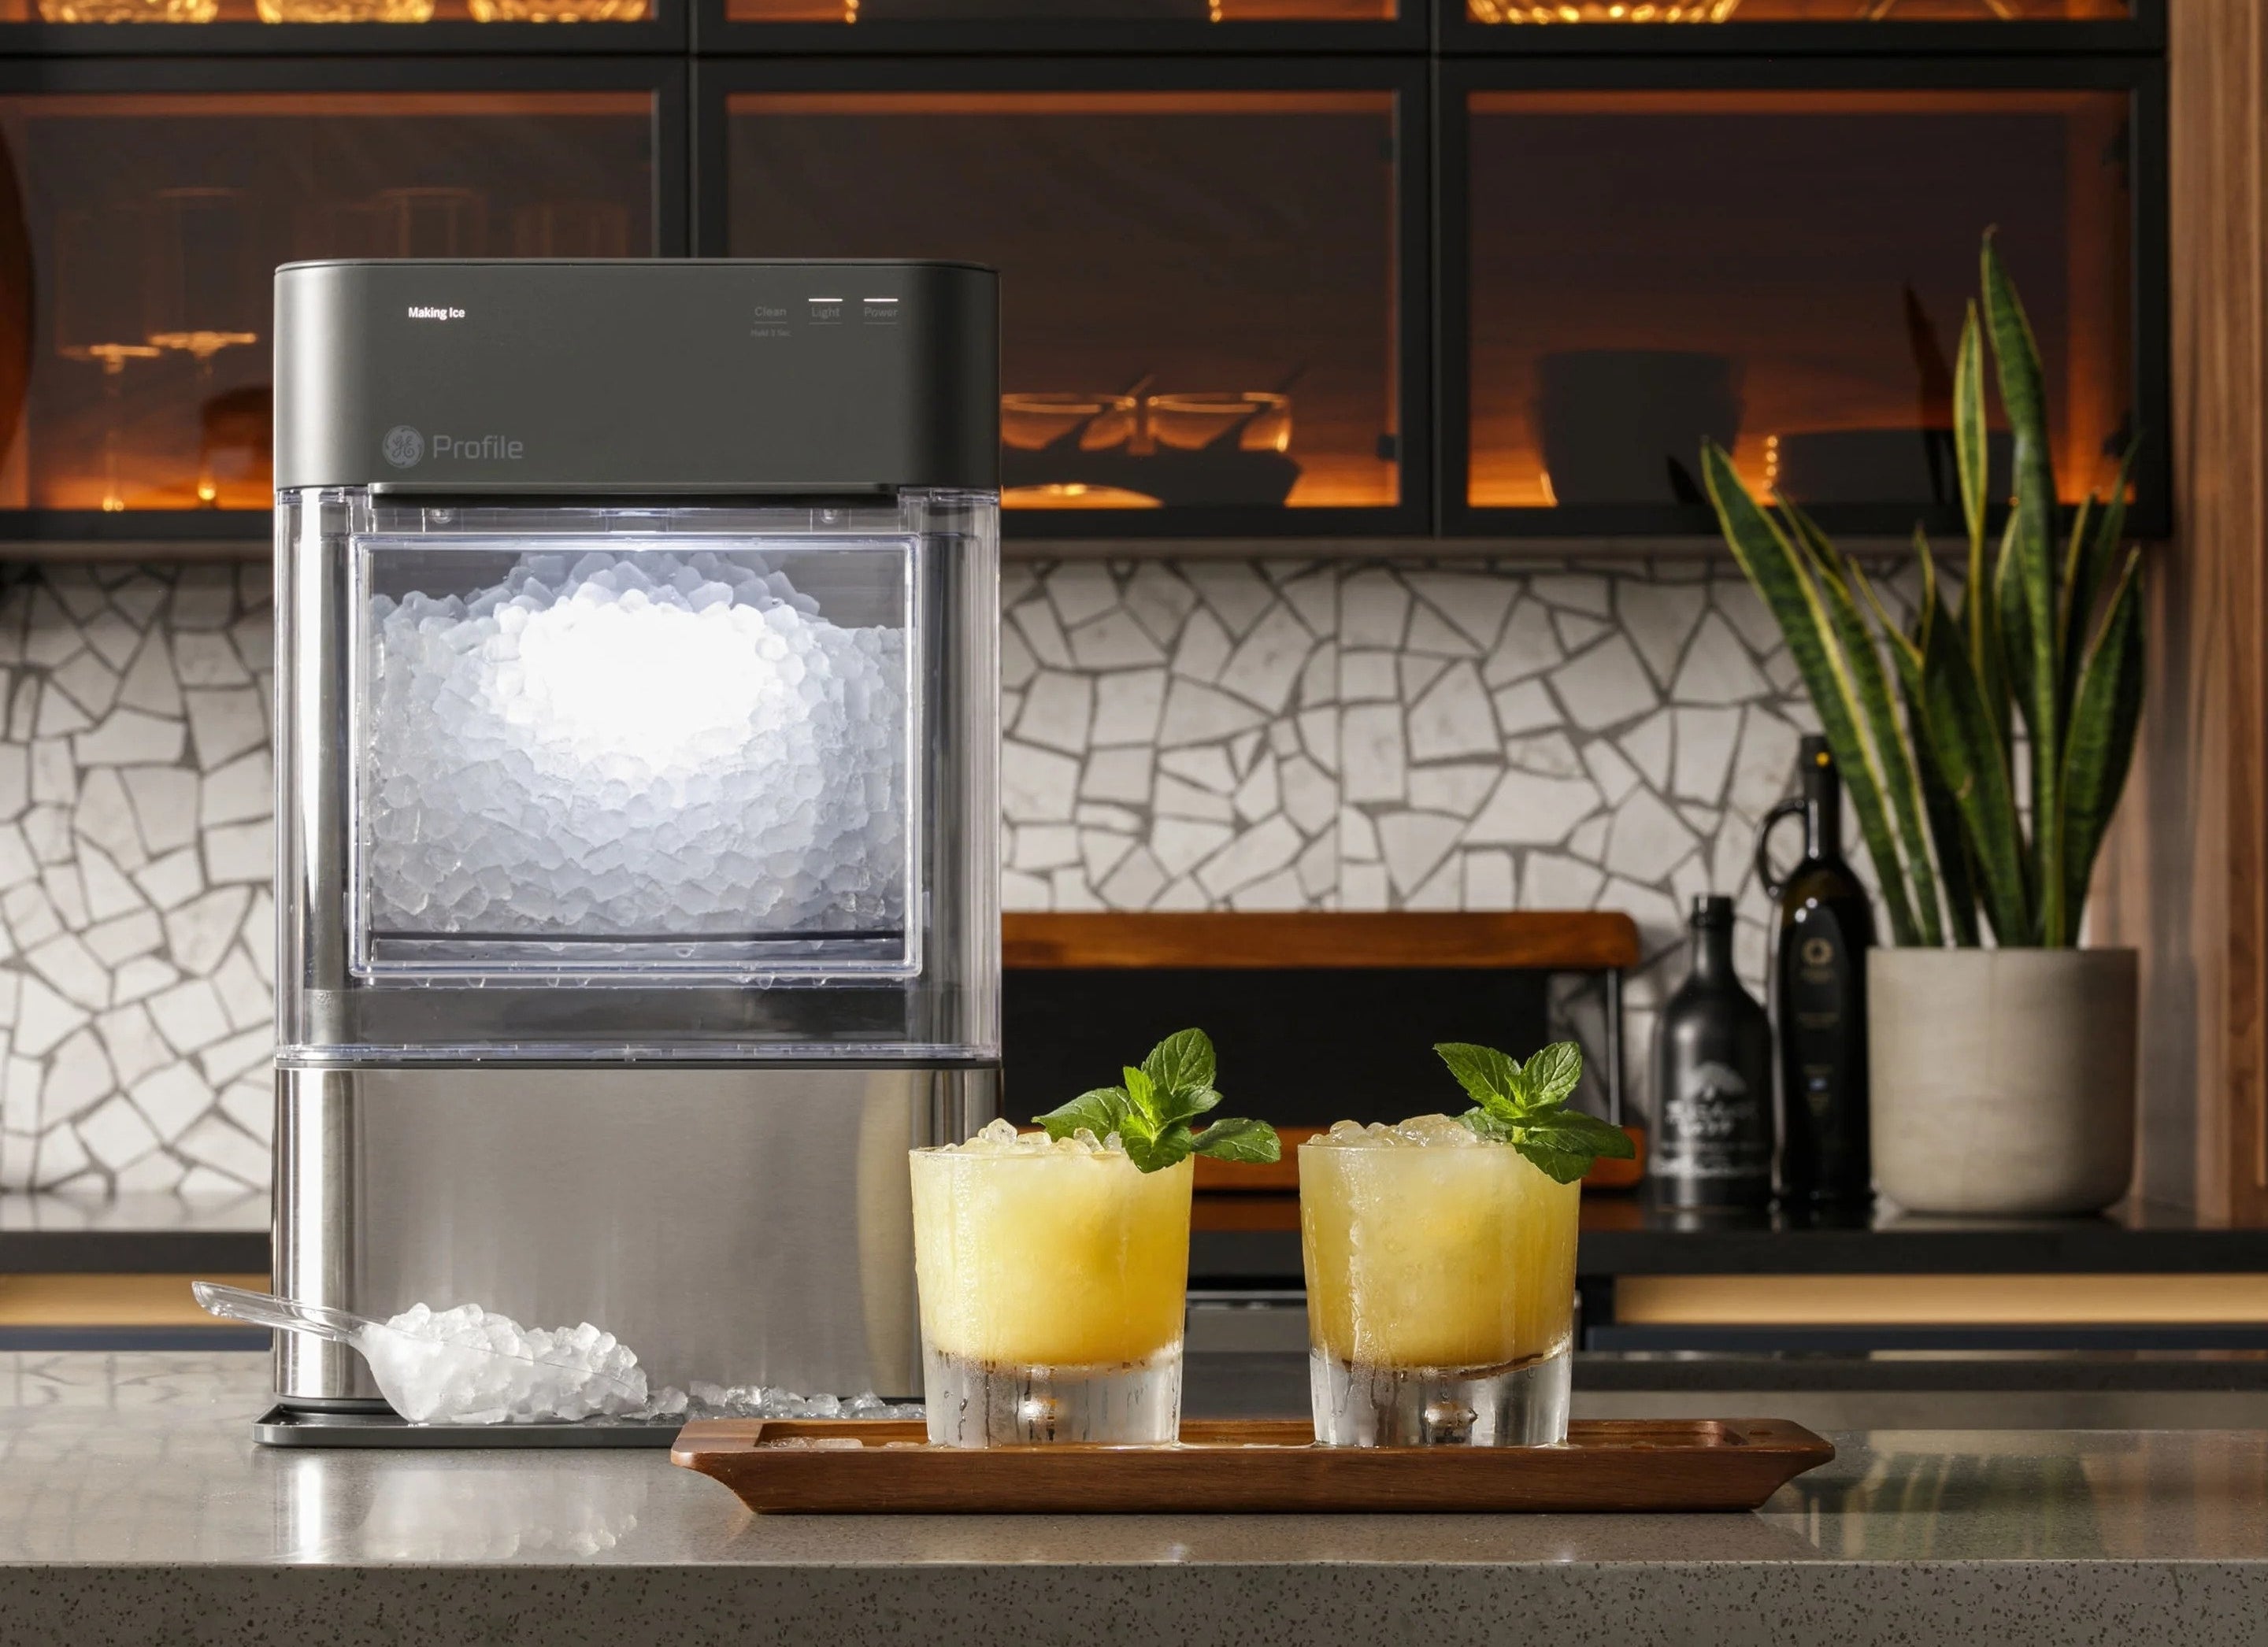 The ice maker with a transparent bin and stainless steel finish